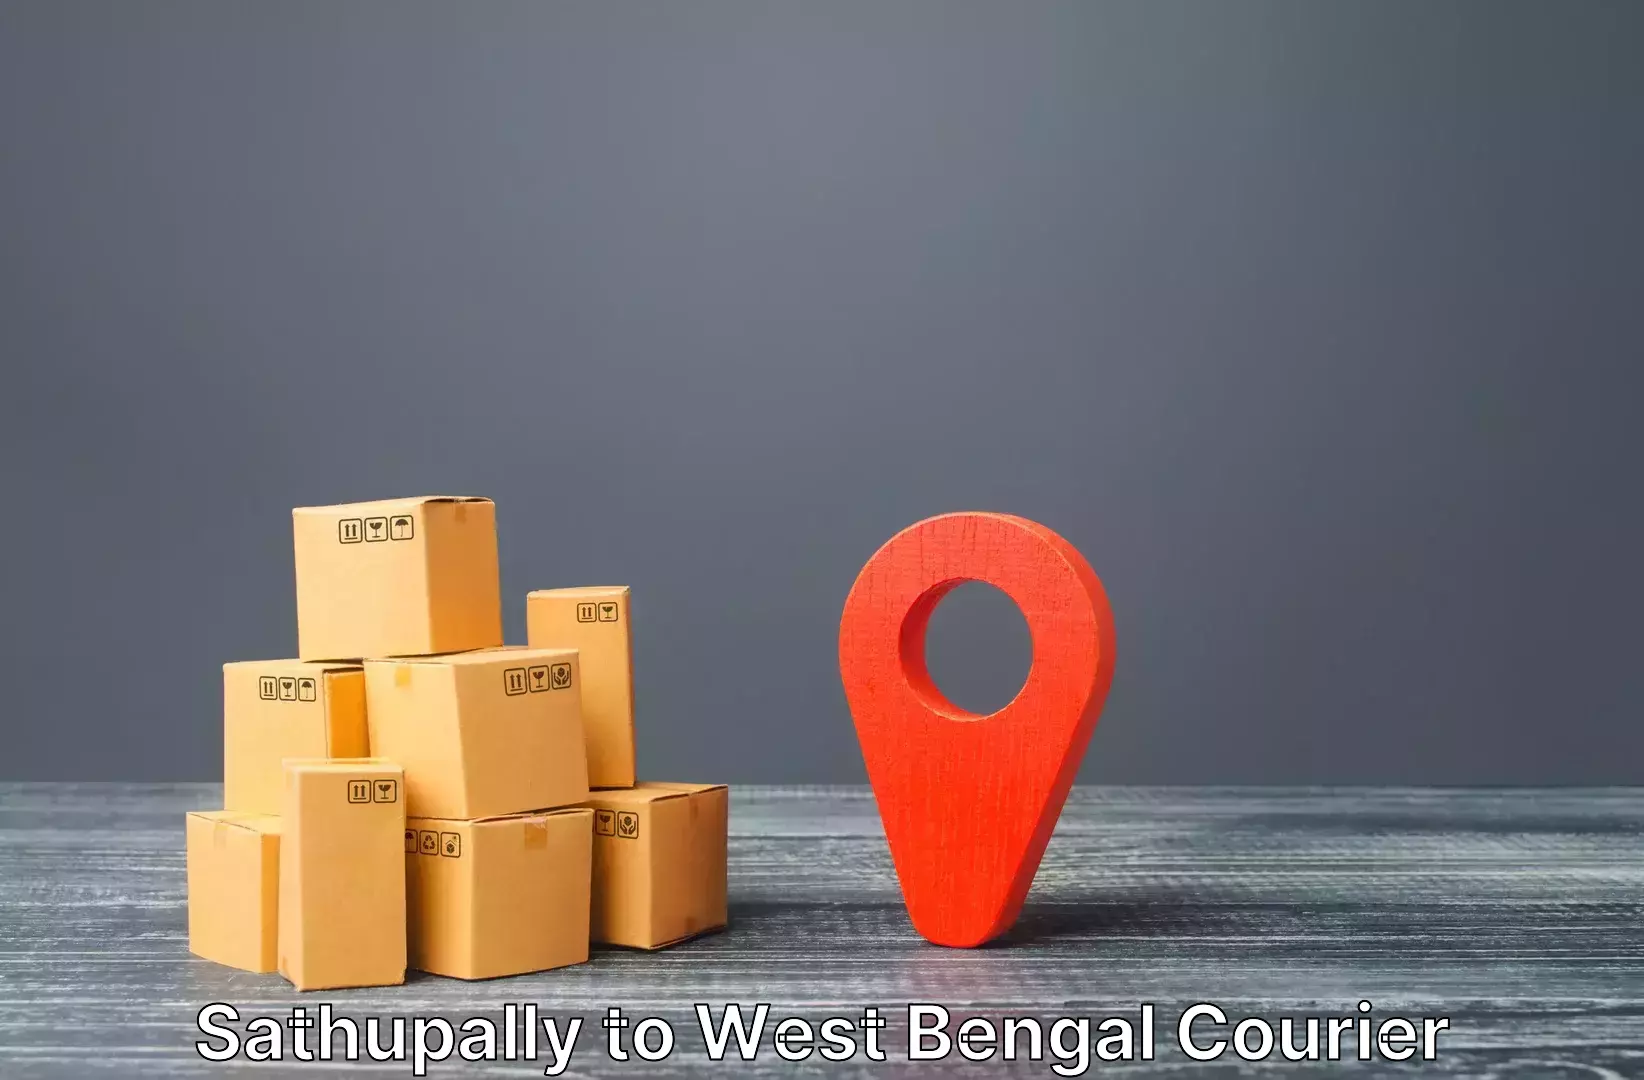 Doorstep luggage collection in Sathupally to Siliguri